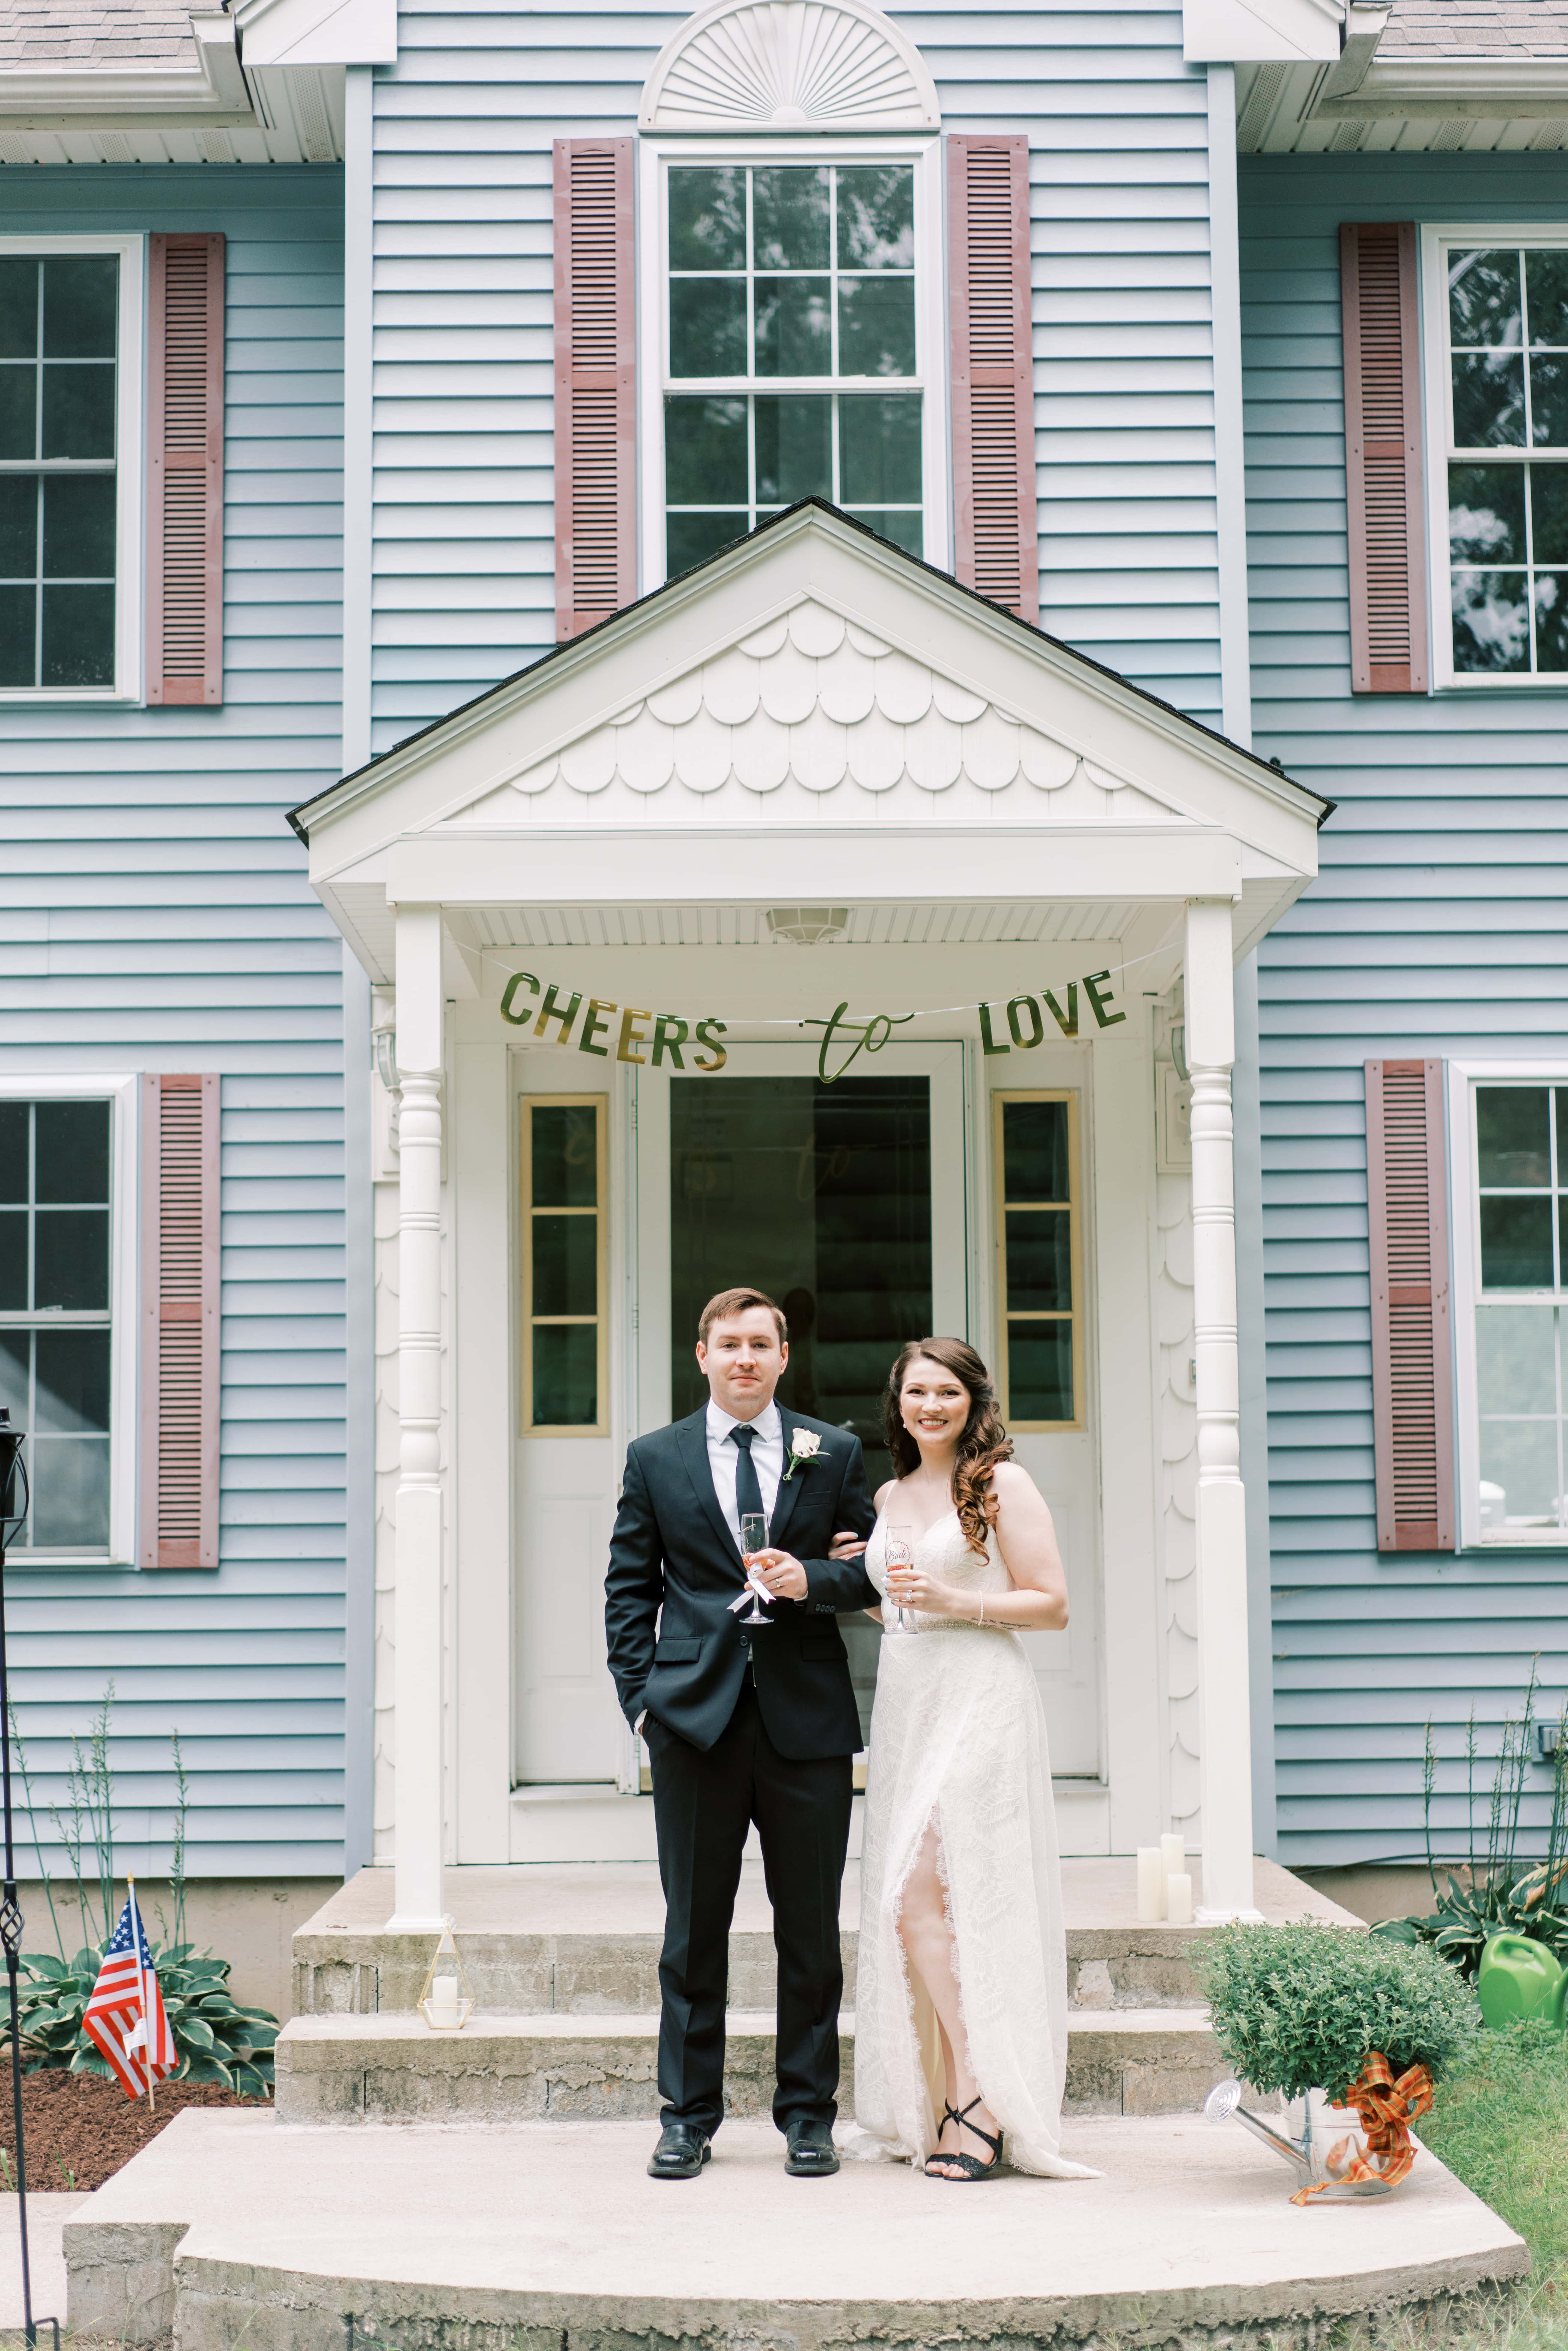 Bride and groom posing in front of their intimate small wedding venue with a banner hanging behind them that reads Cheers to Love